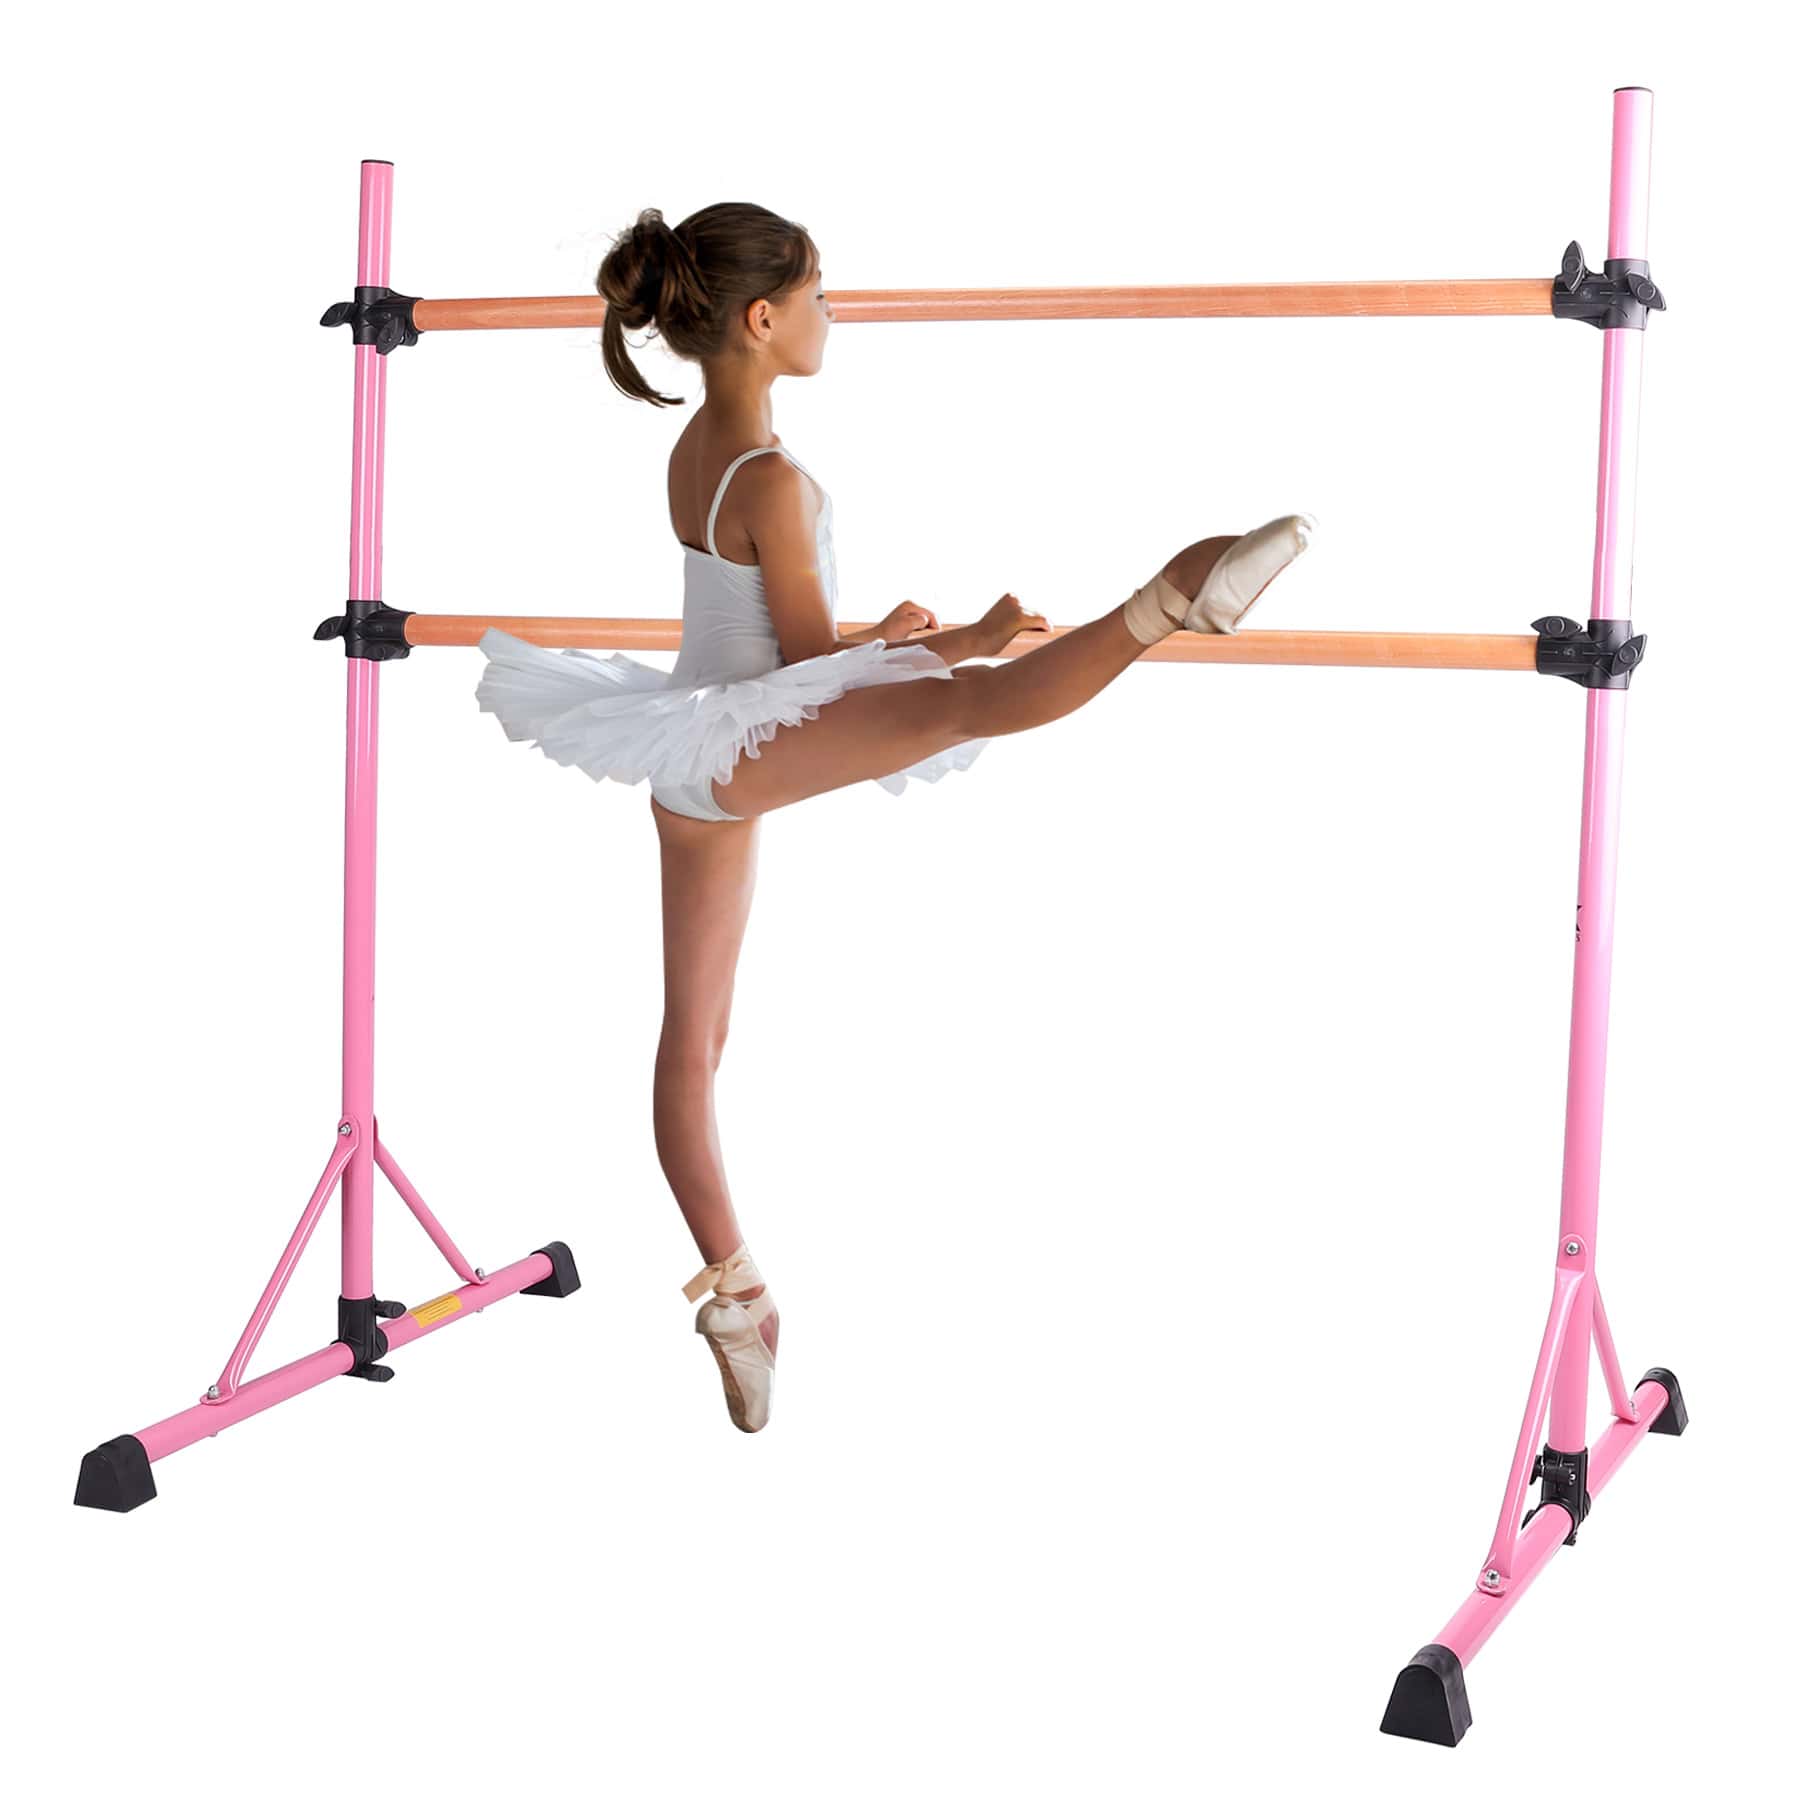 Ballet Barre Portable for Home or Studio, Height Indonesia